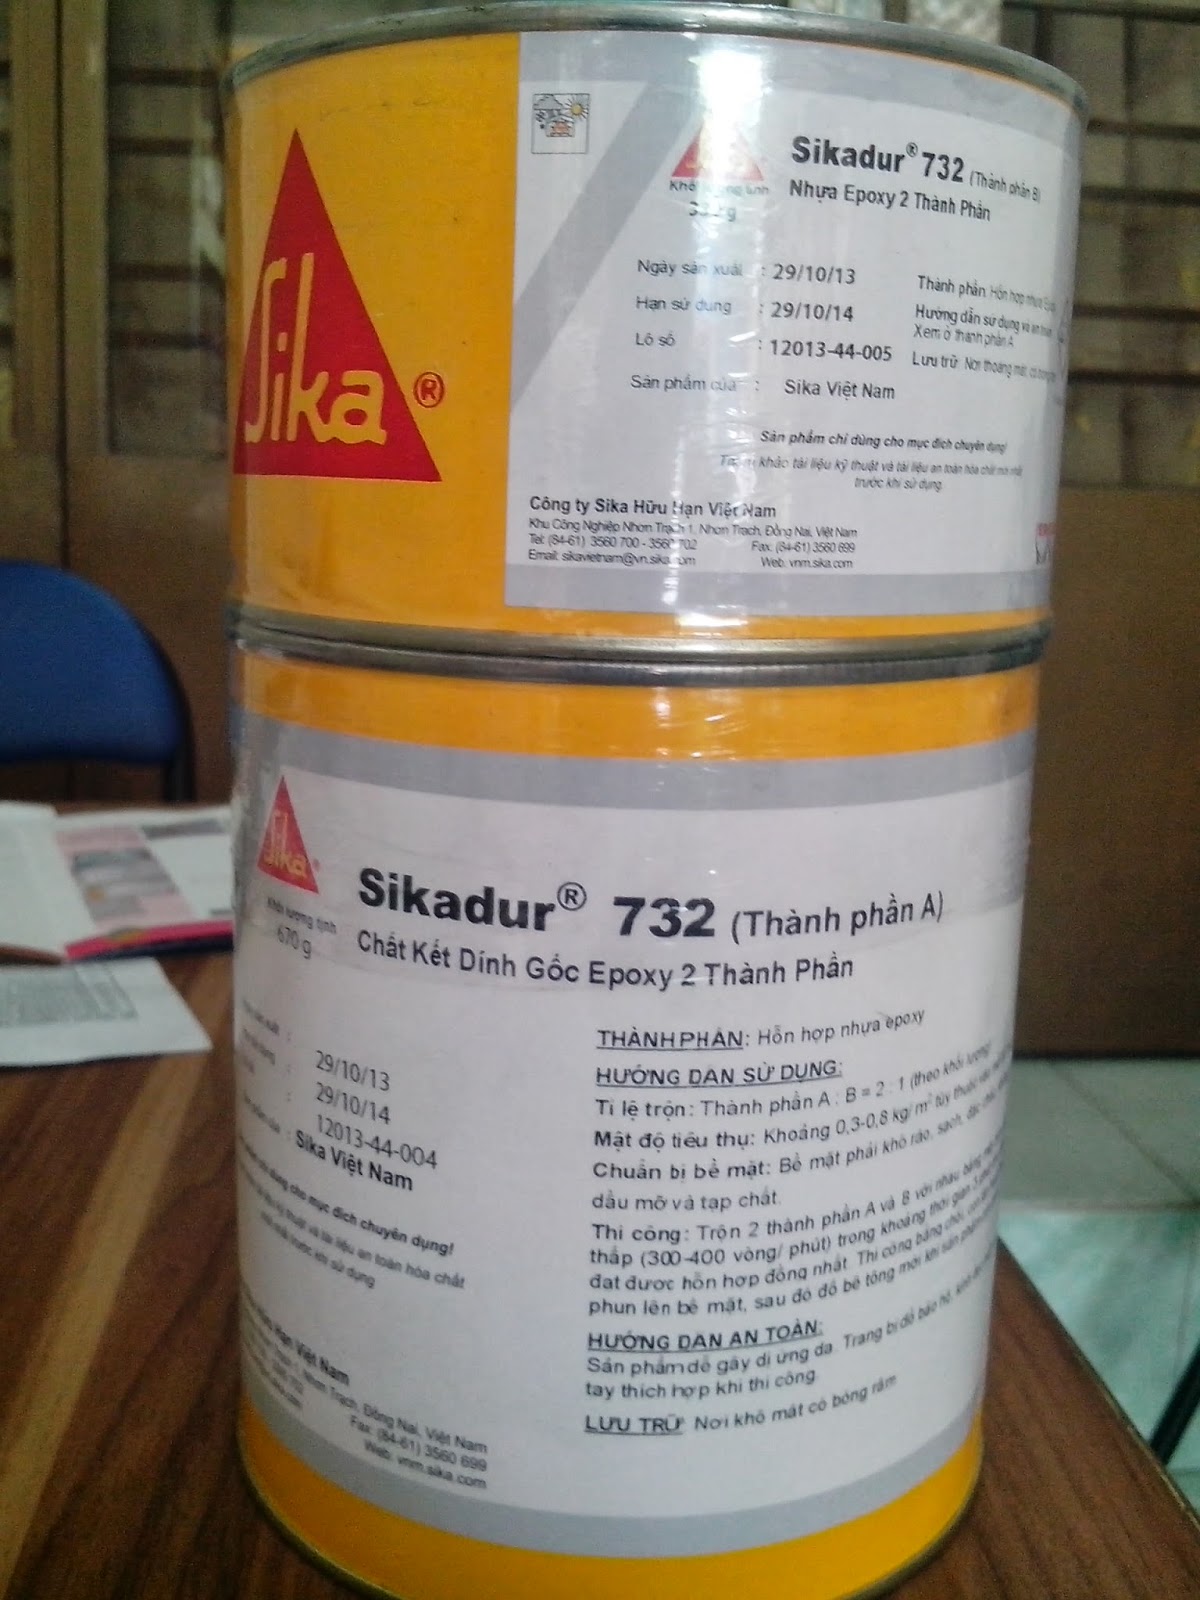 Sika Dur 732